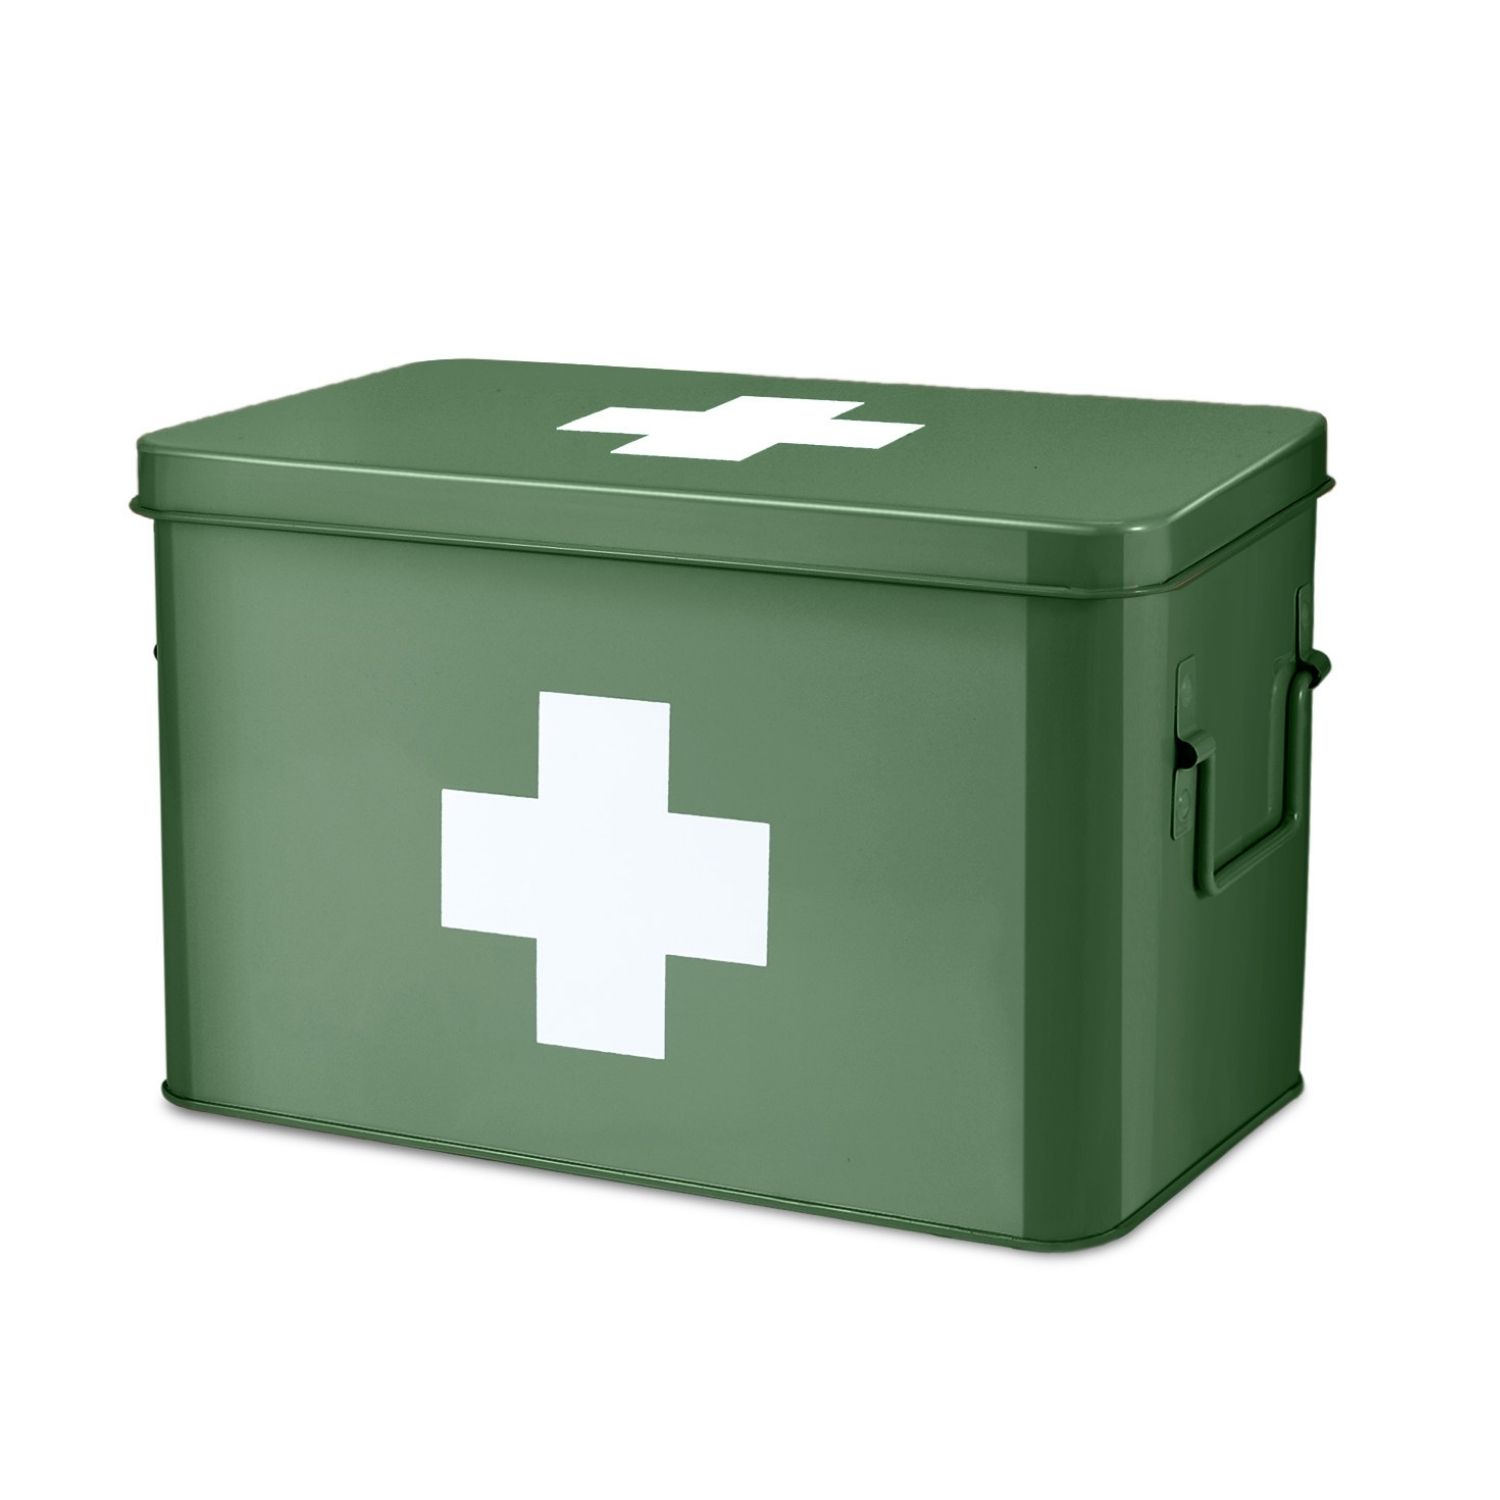 CE Compass First Aid Medicine Box Supplies Kit Storage Organizer 12.5" Green Metal Tin Empty Bin Boxes with Removable Tray Handle for Home